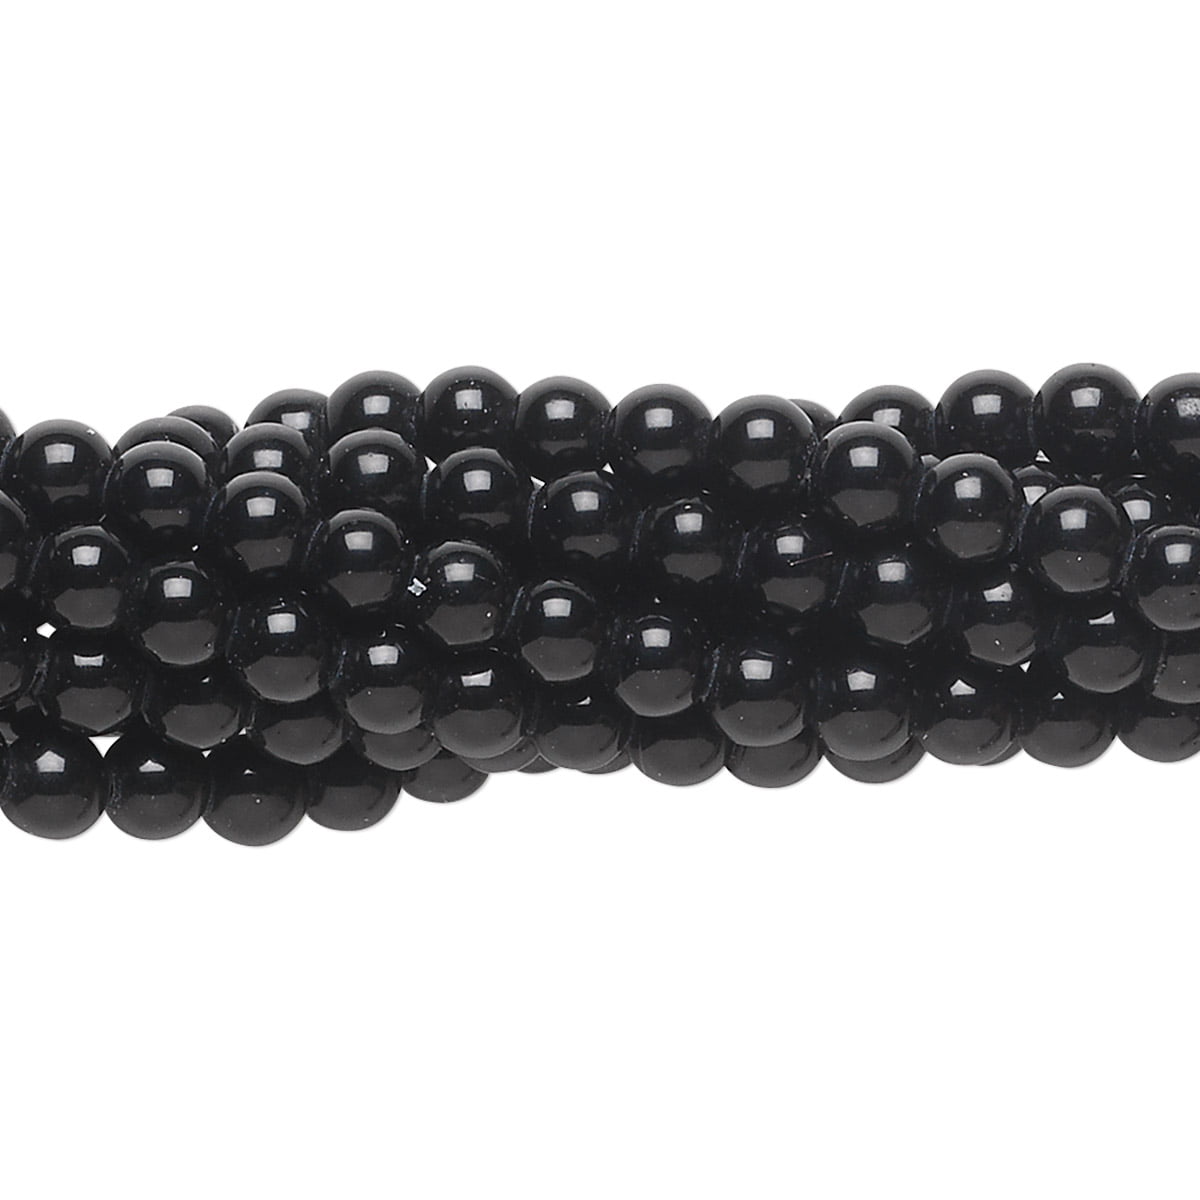 5 sixteen inch strands of black beads.